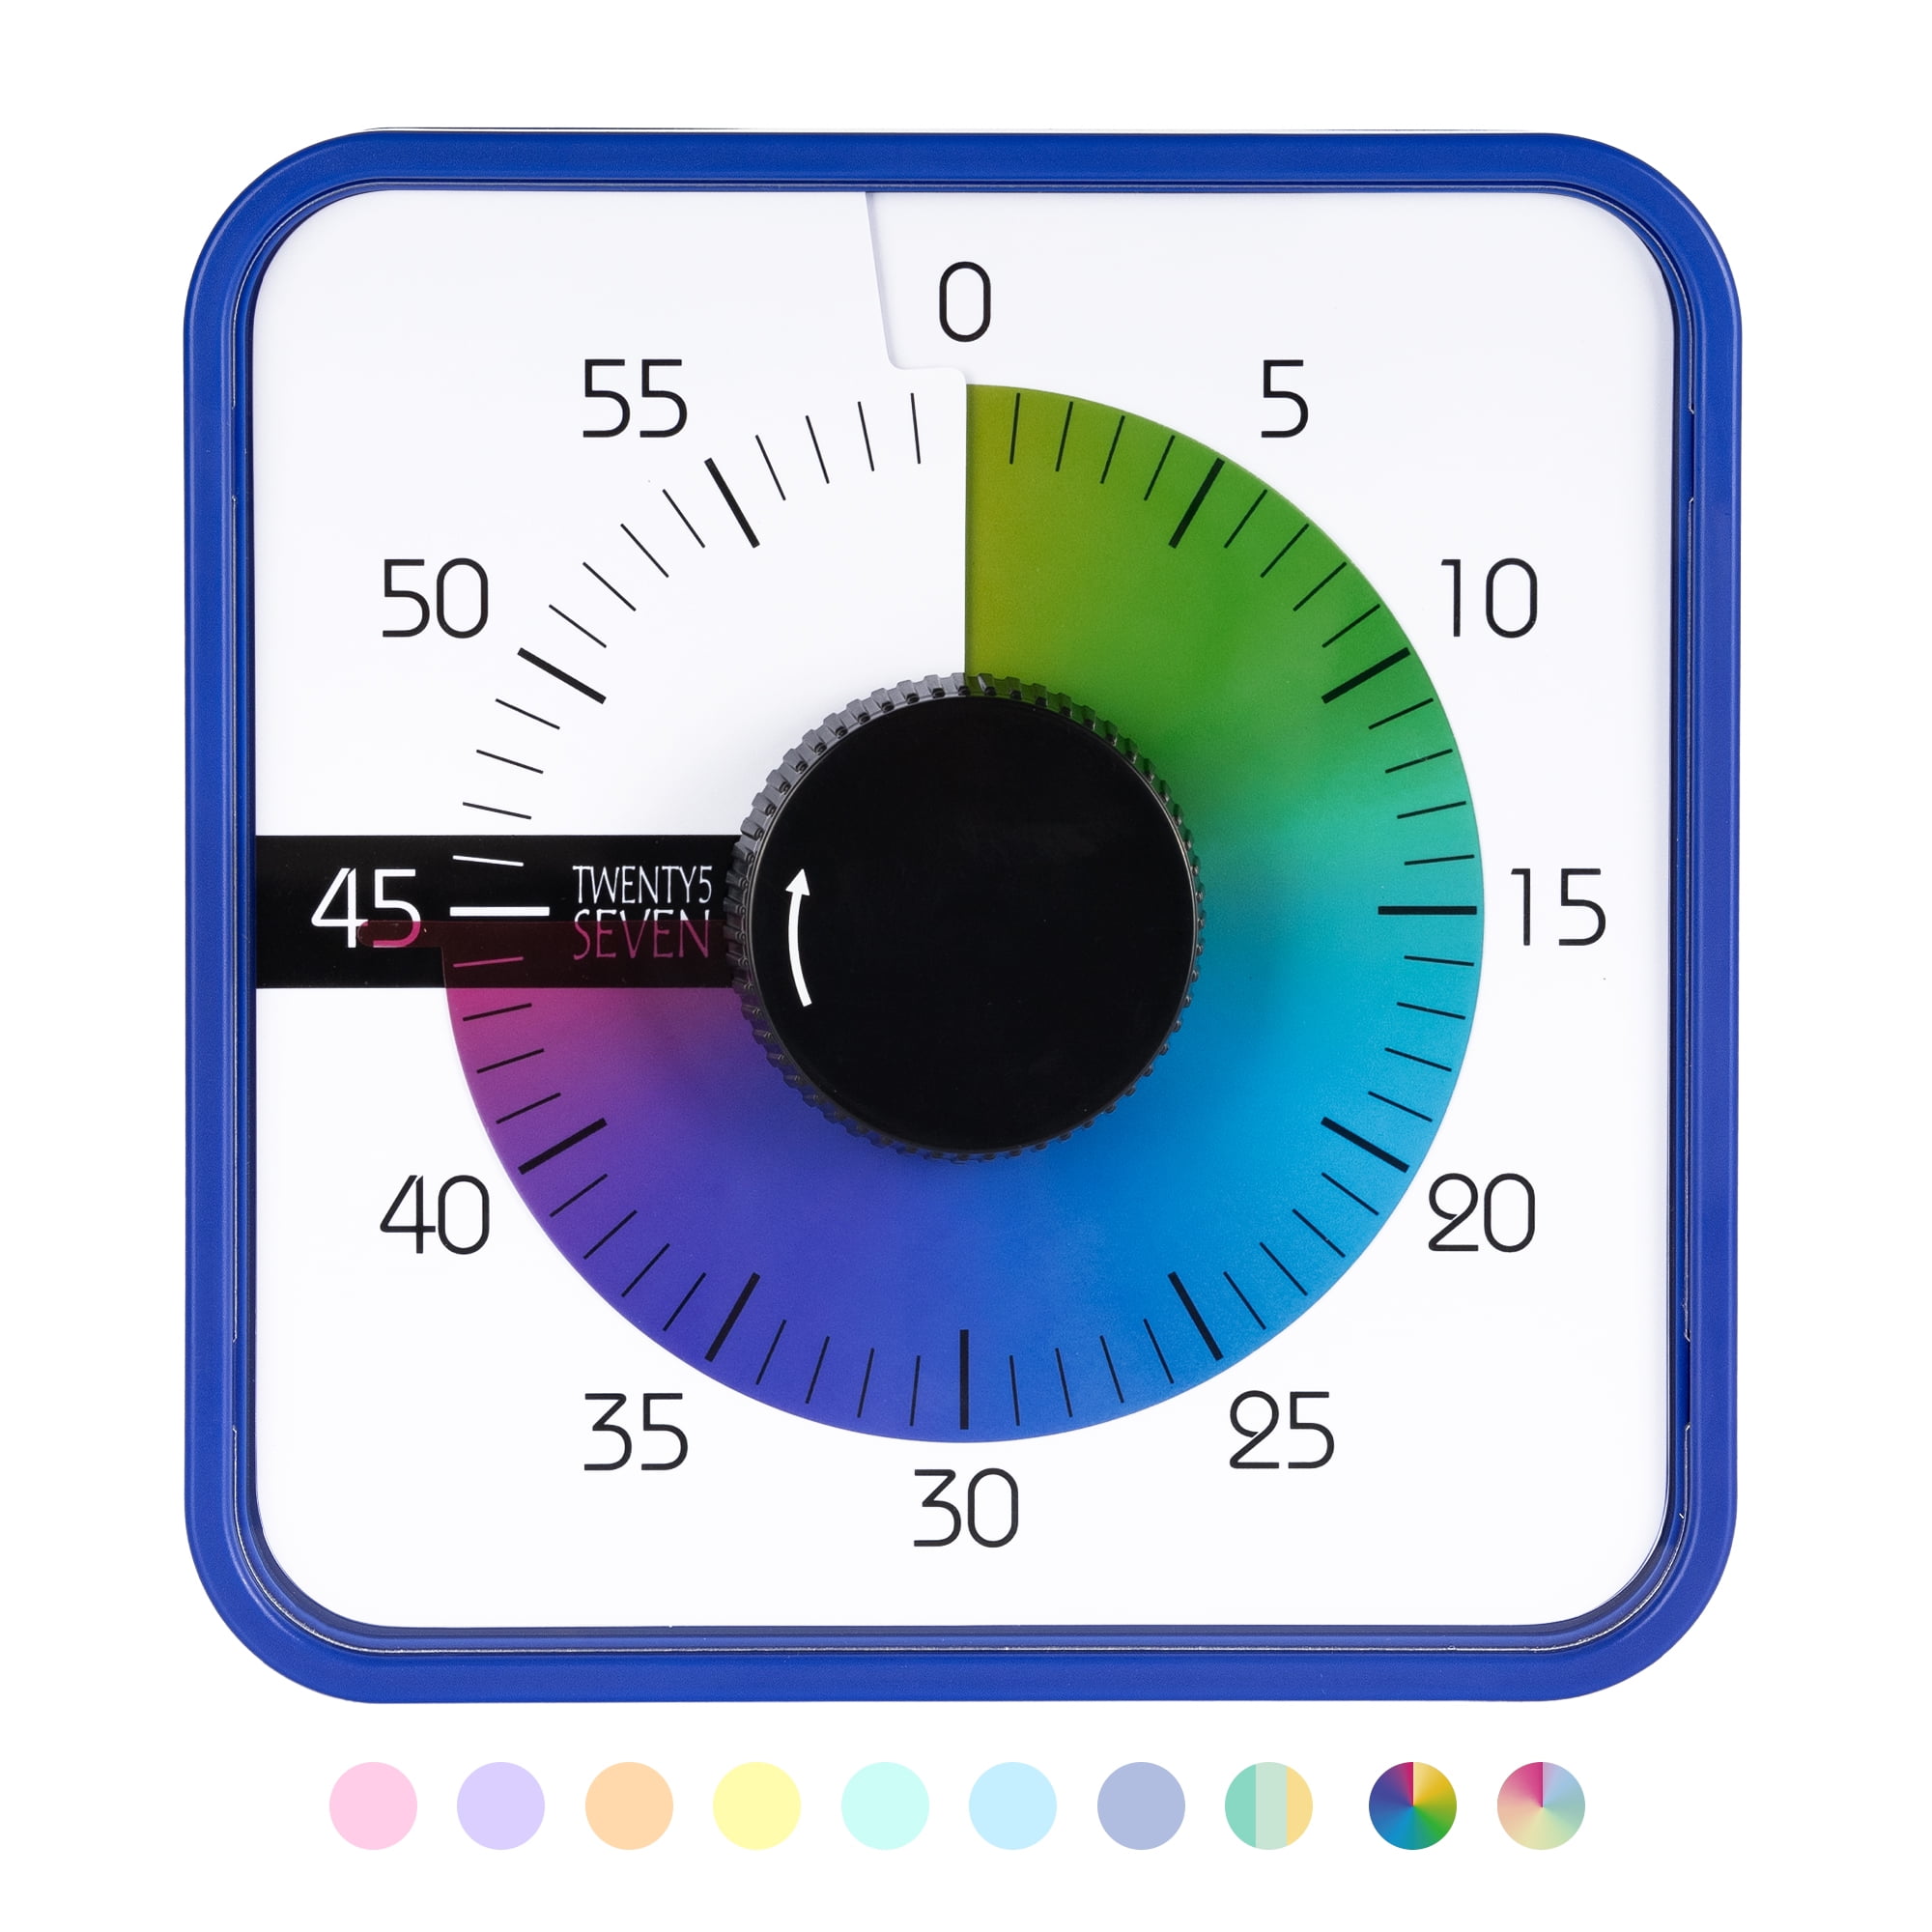 Fun Countdown Timers for the Classroom